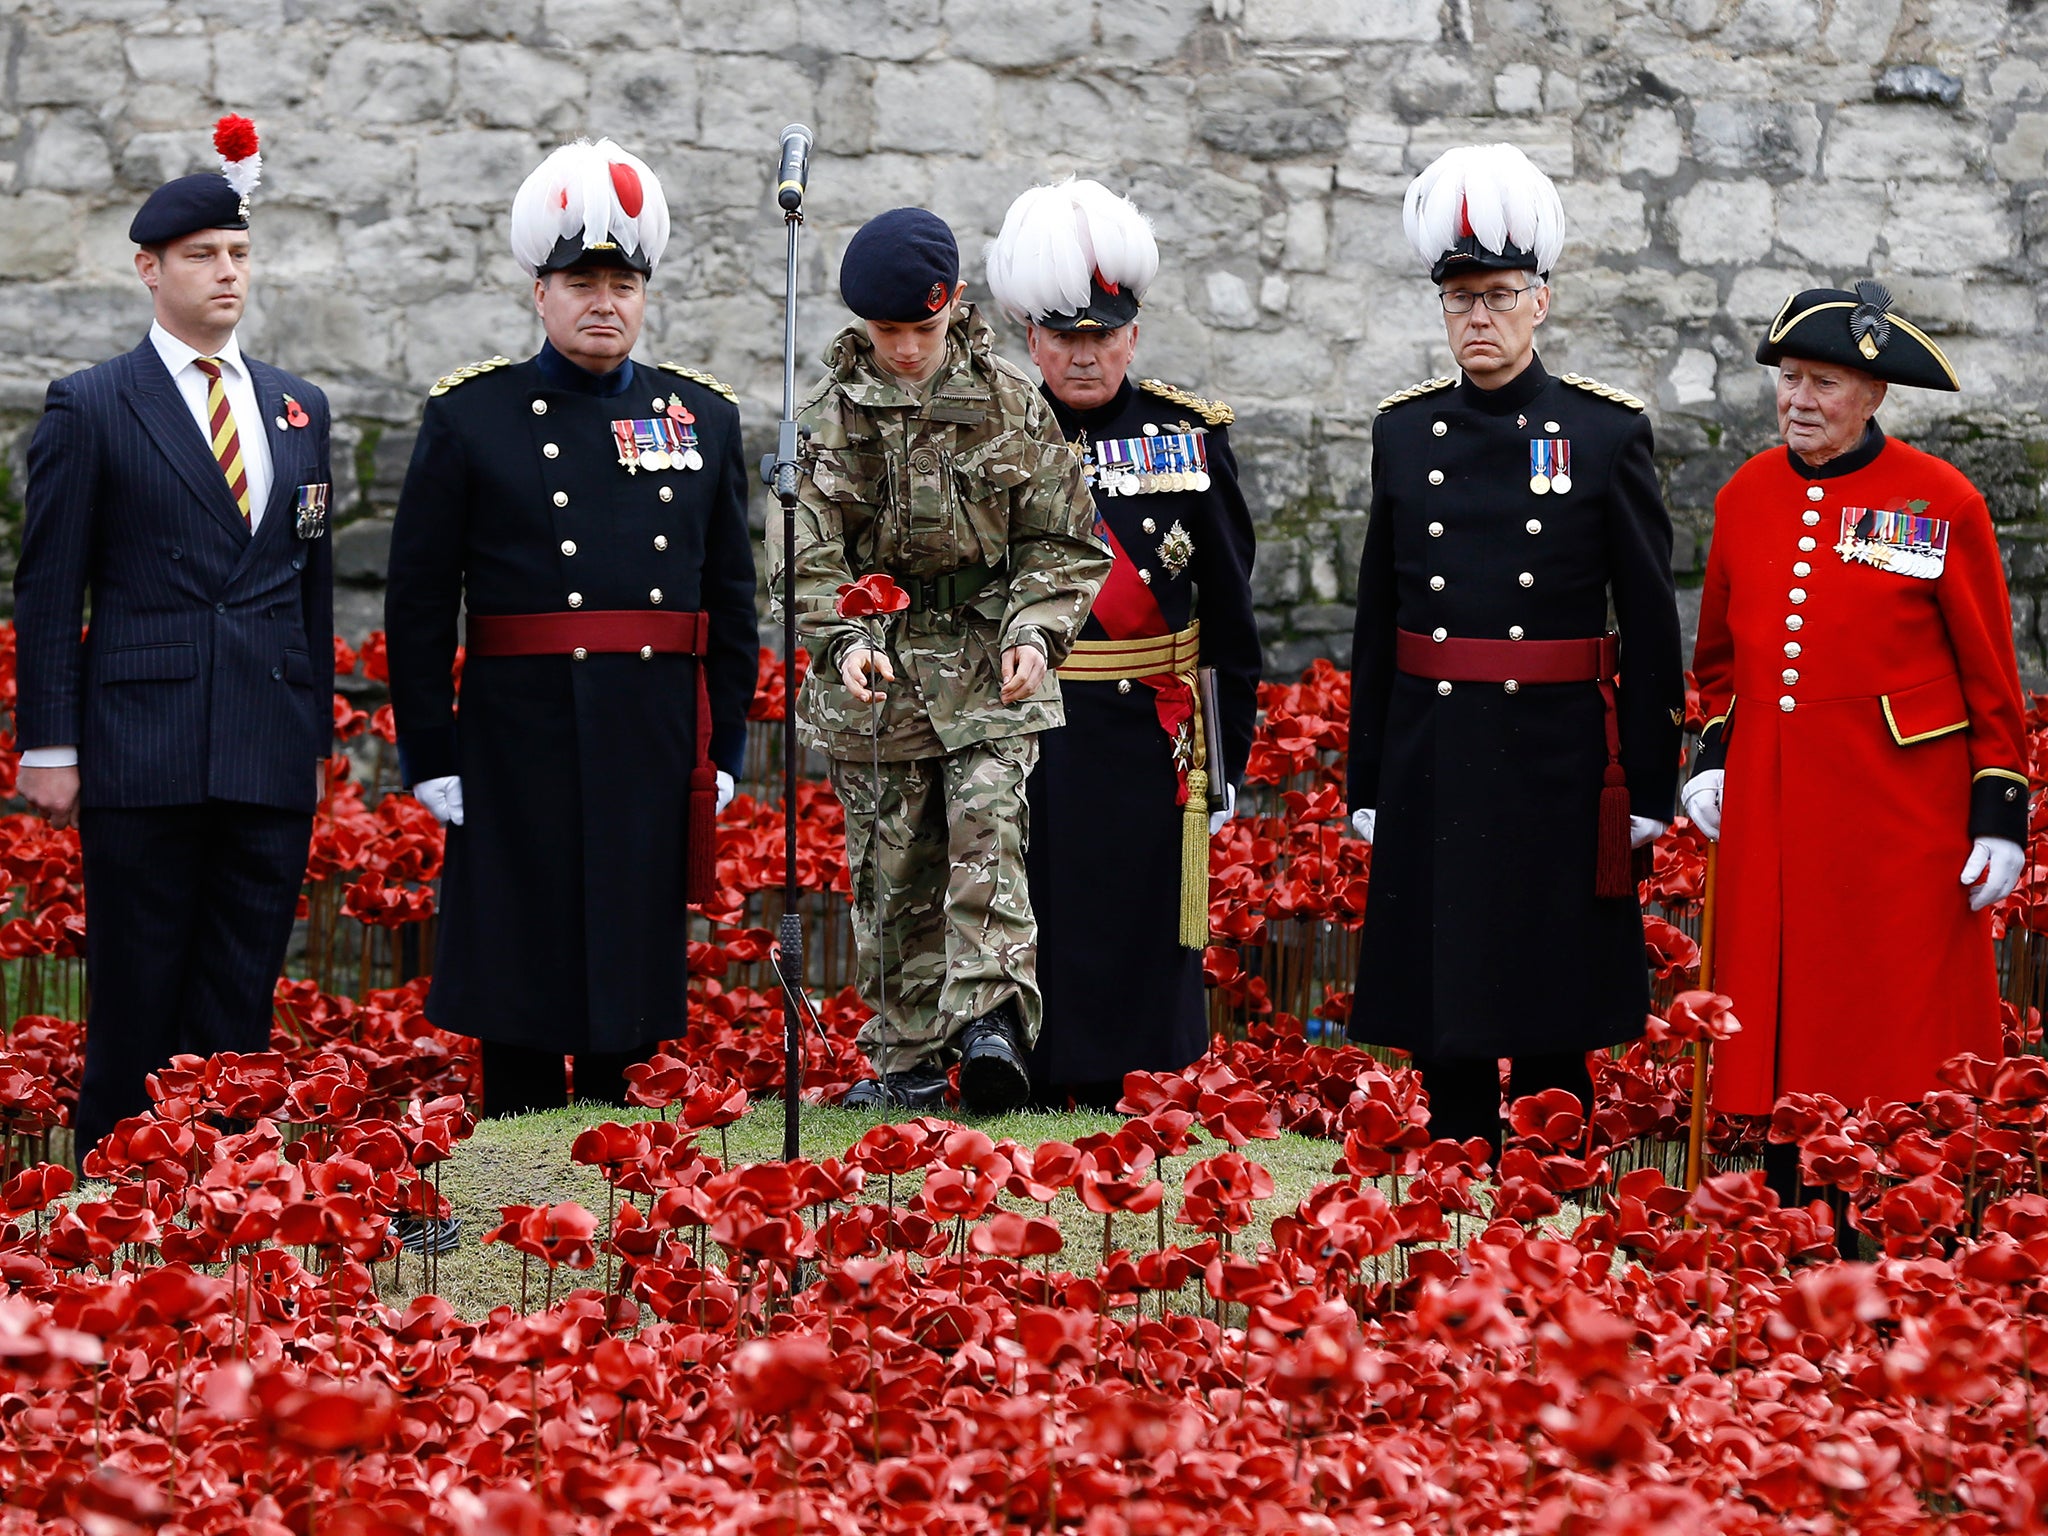 Cadet Harry Alexander Hayes plants the last poppy during a remembrance day ceremony into the ceramic poppy art installation by artist Paul Cummins entitled 'Blood Swept Lands and Seas of Red' in the dry moat of the Tower of London 